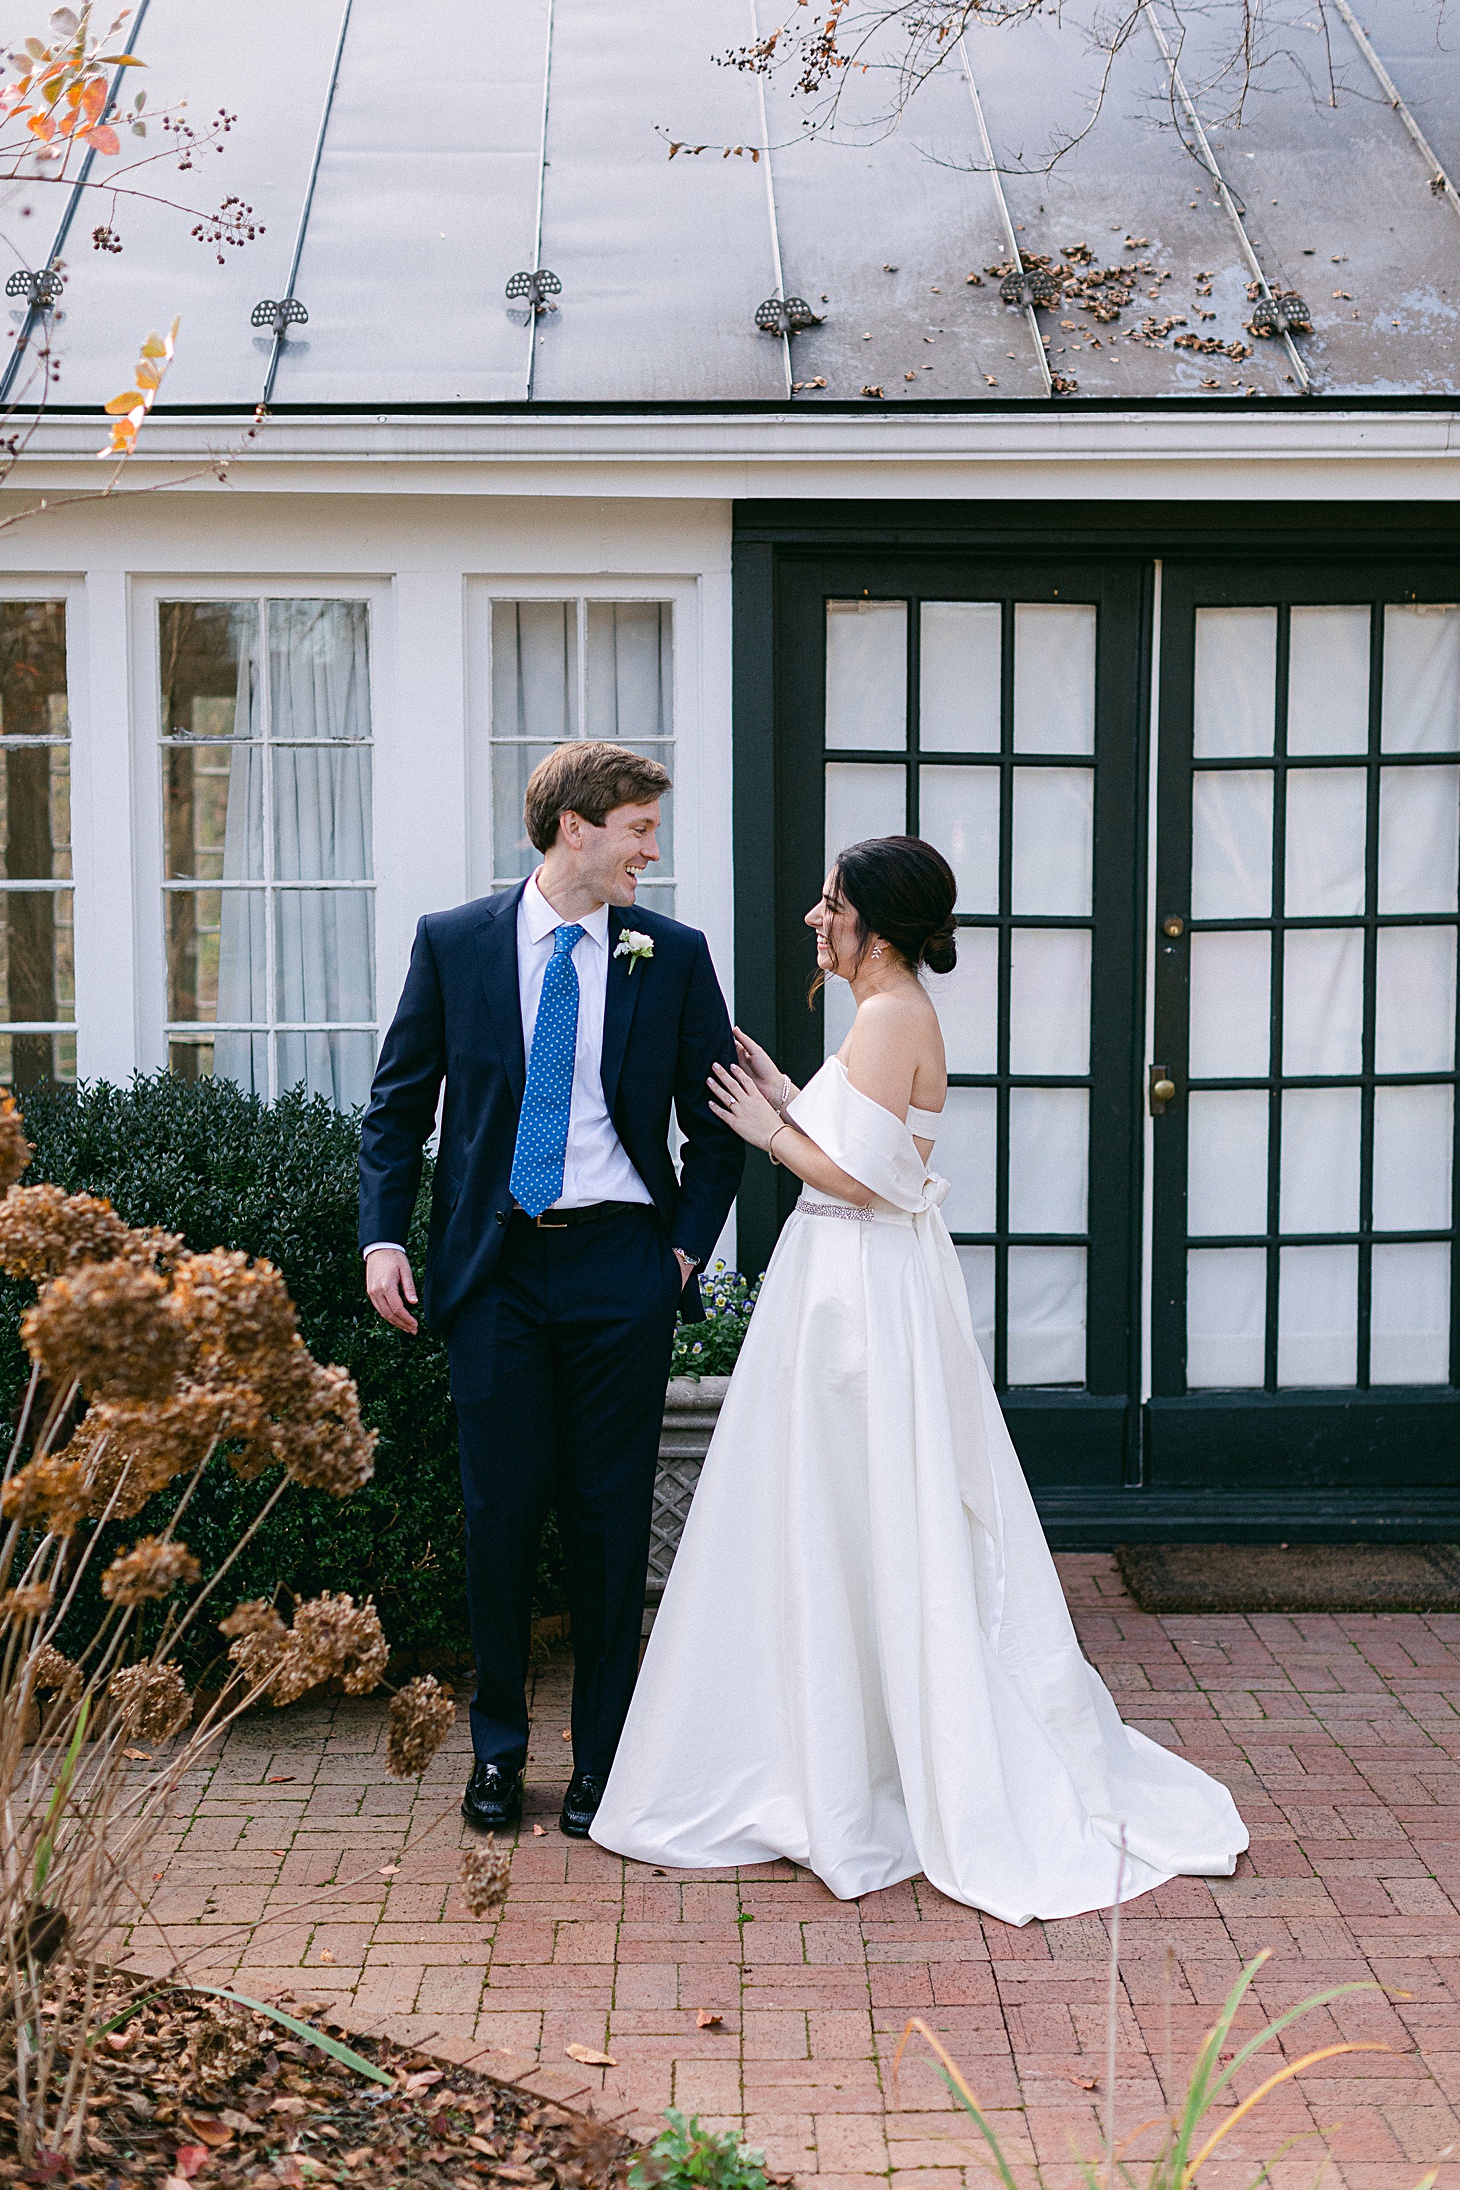 First look at wedding at The Clifton Charlottesville by Sarah Bradshaw Photography